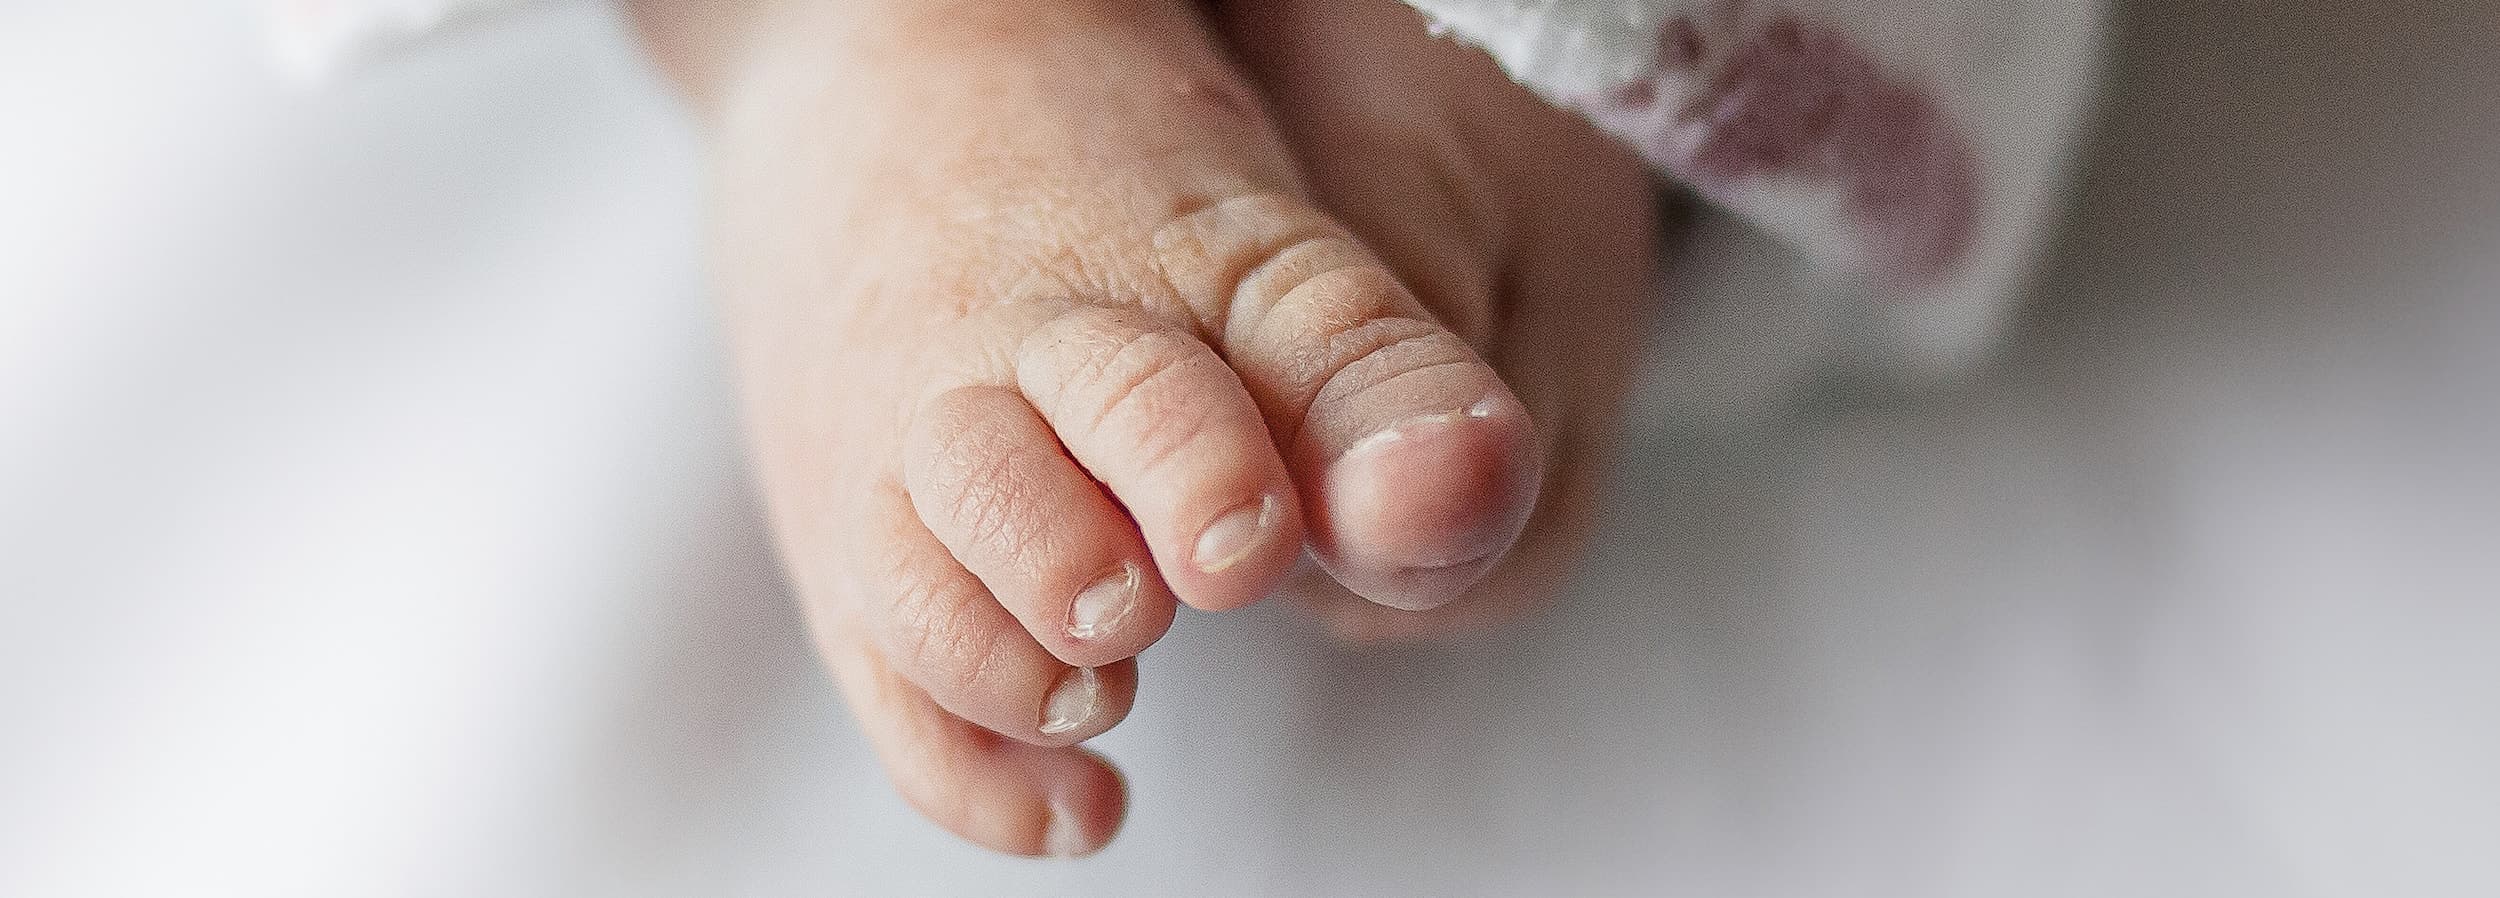 An image of newborn baby toes